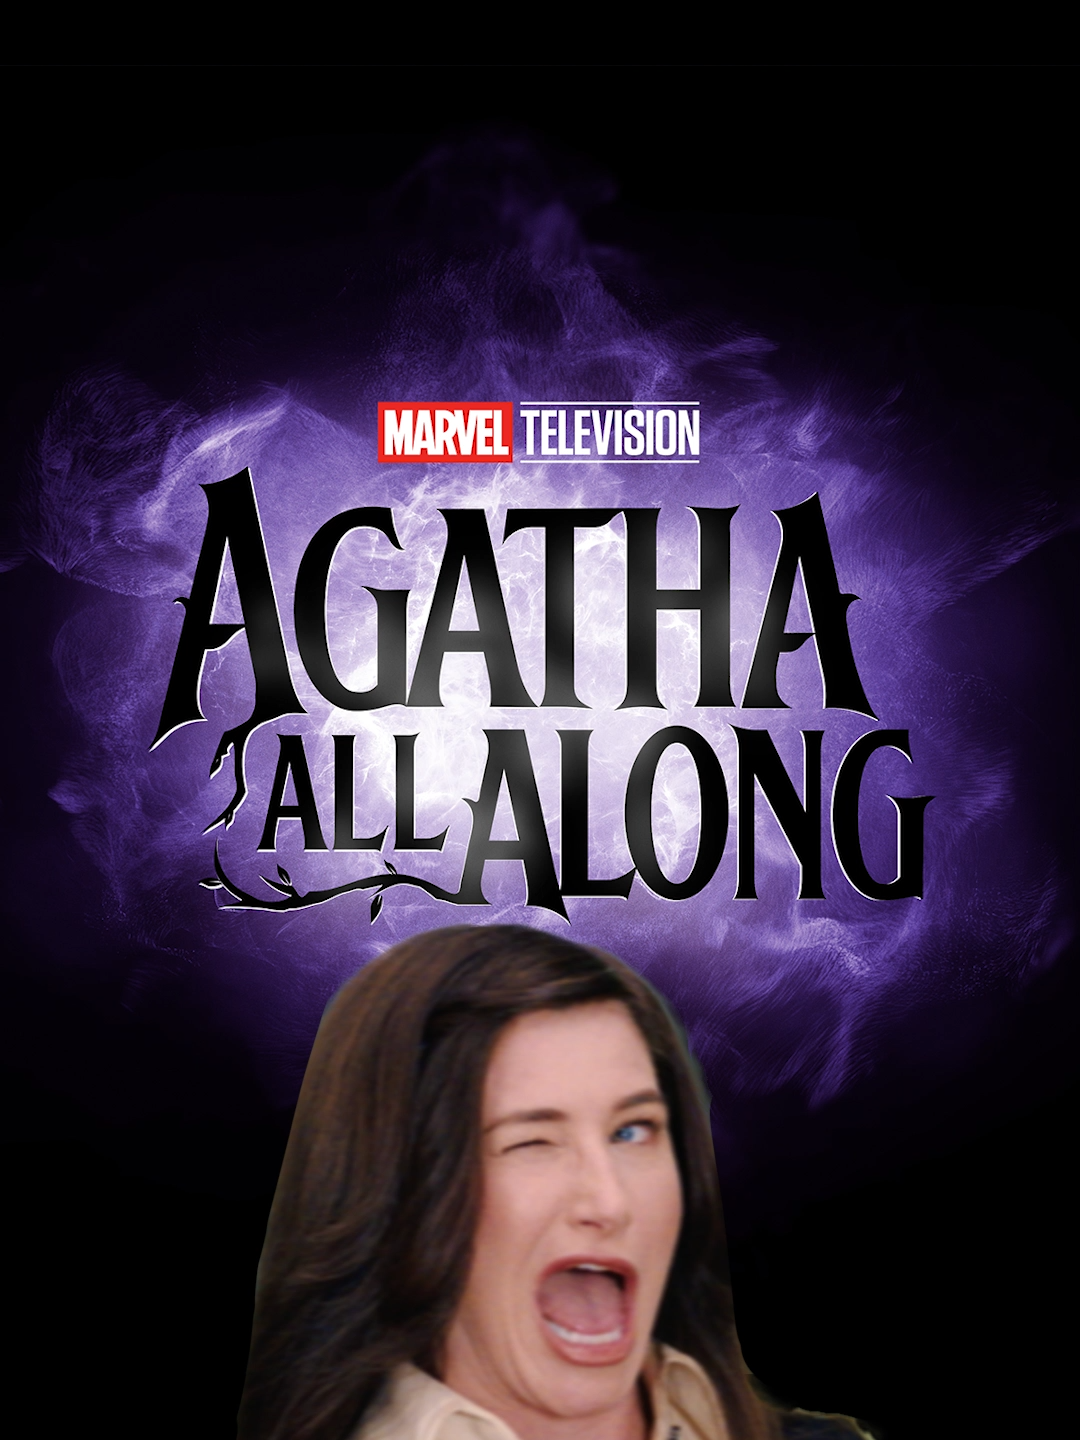 It was Agatha All Along 🔮 Don’t miss the two-episode premiere of #AgathaAllAlong, September 18 on @disneyplus. #AgathaHarkness #Marvel